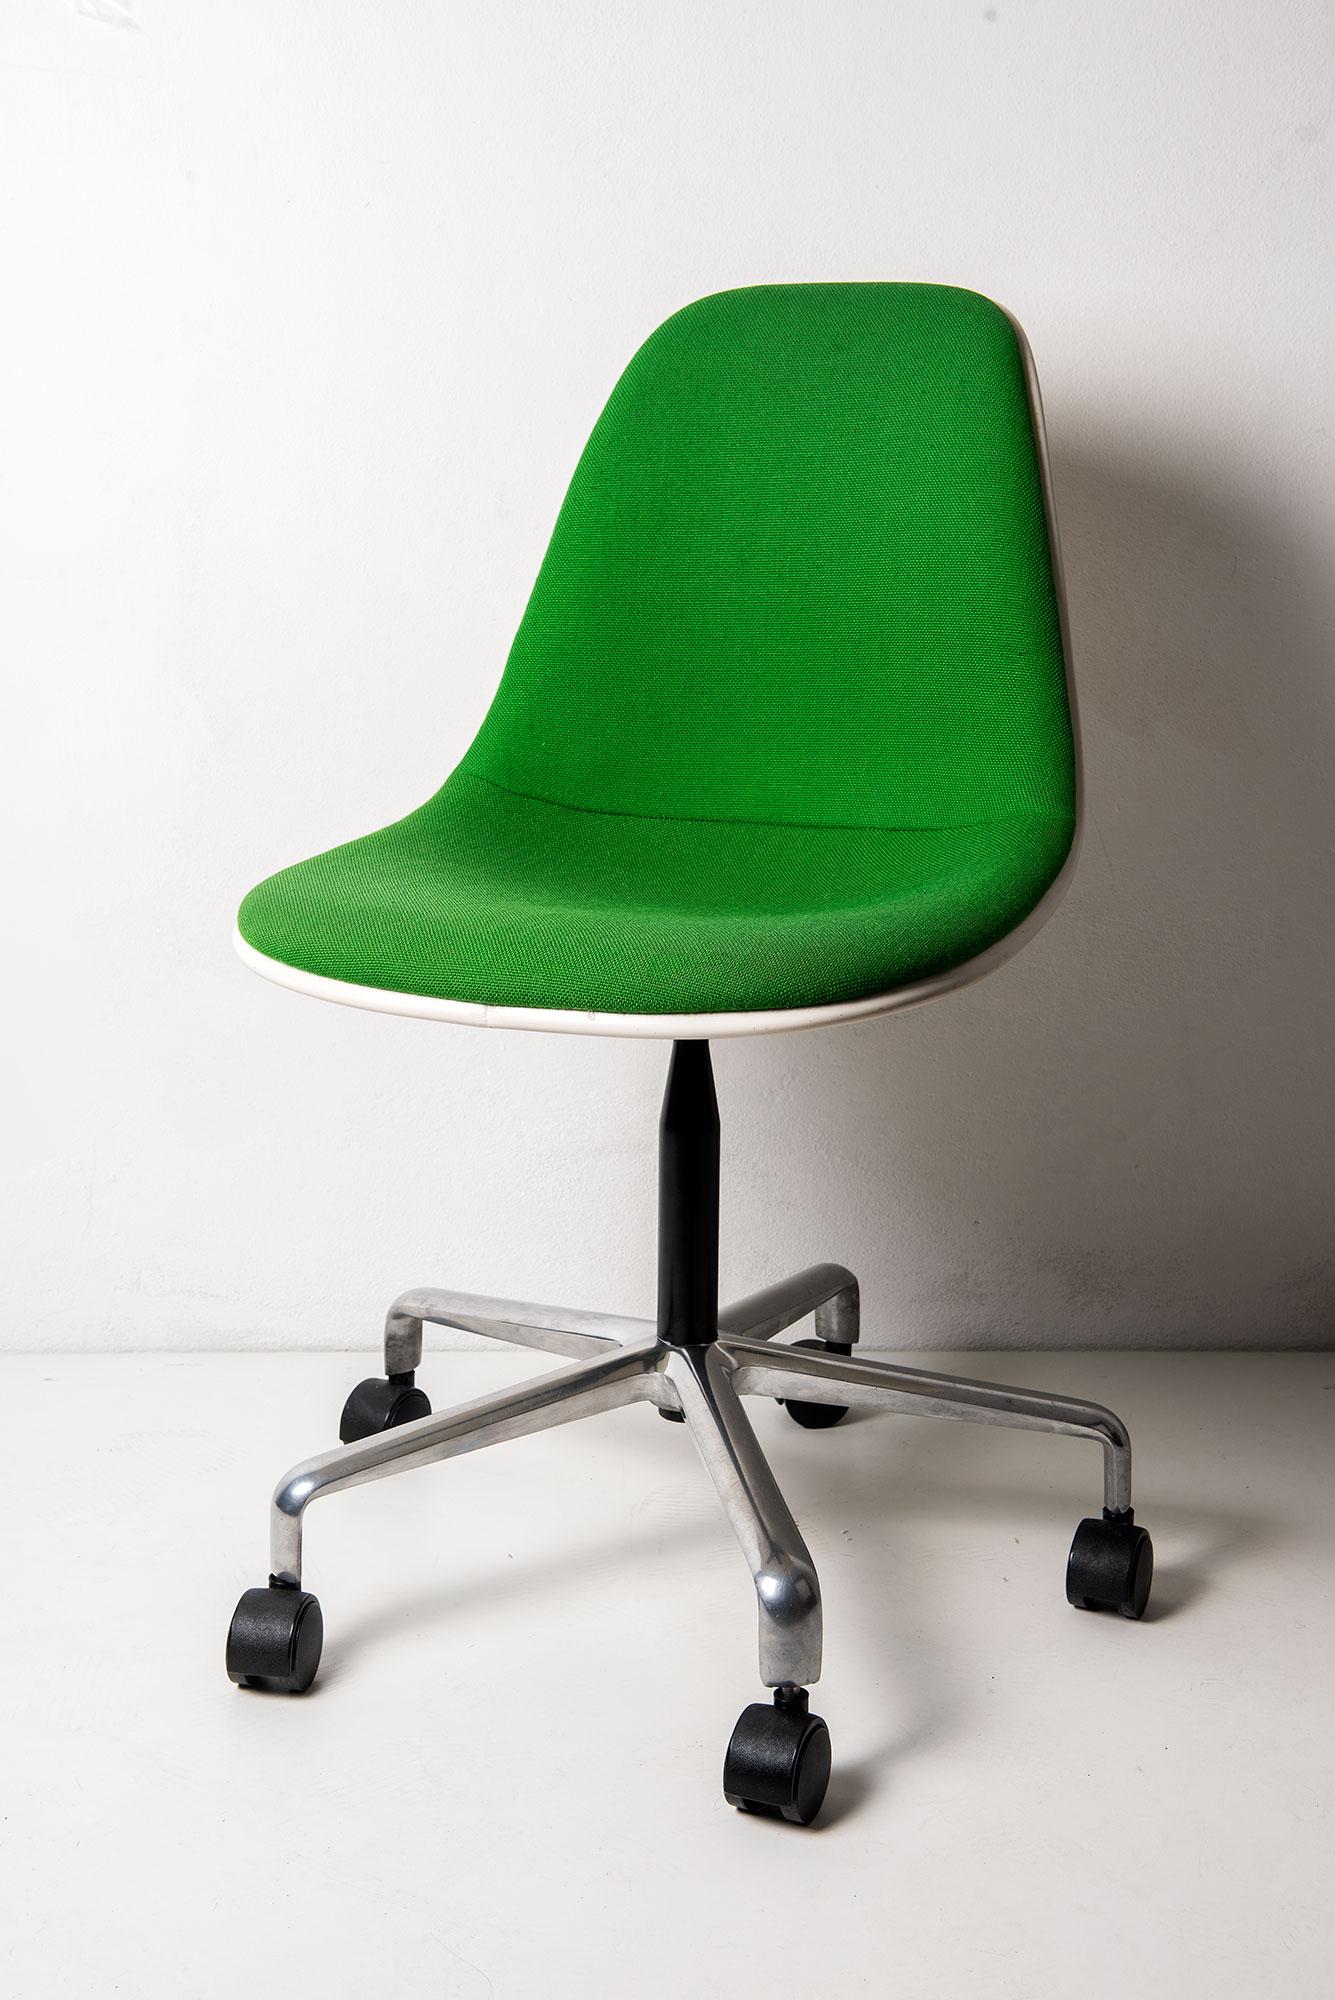 Rare 1960s Charles & Ray Eames PSCC fiberglass chair for Herman Miller. 
Gorgeous well kept green upholstery.
Marked and original label from the reseller.